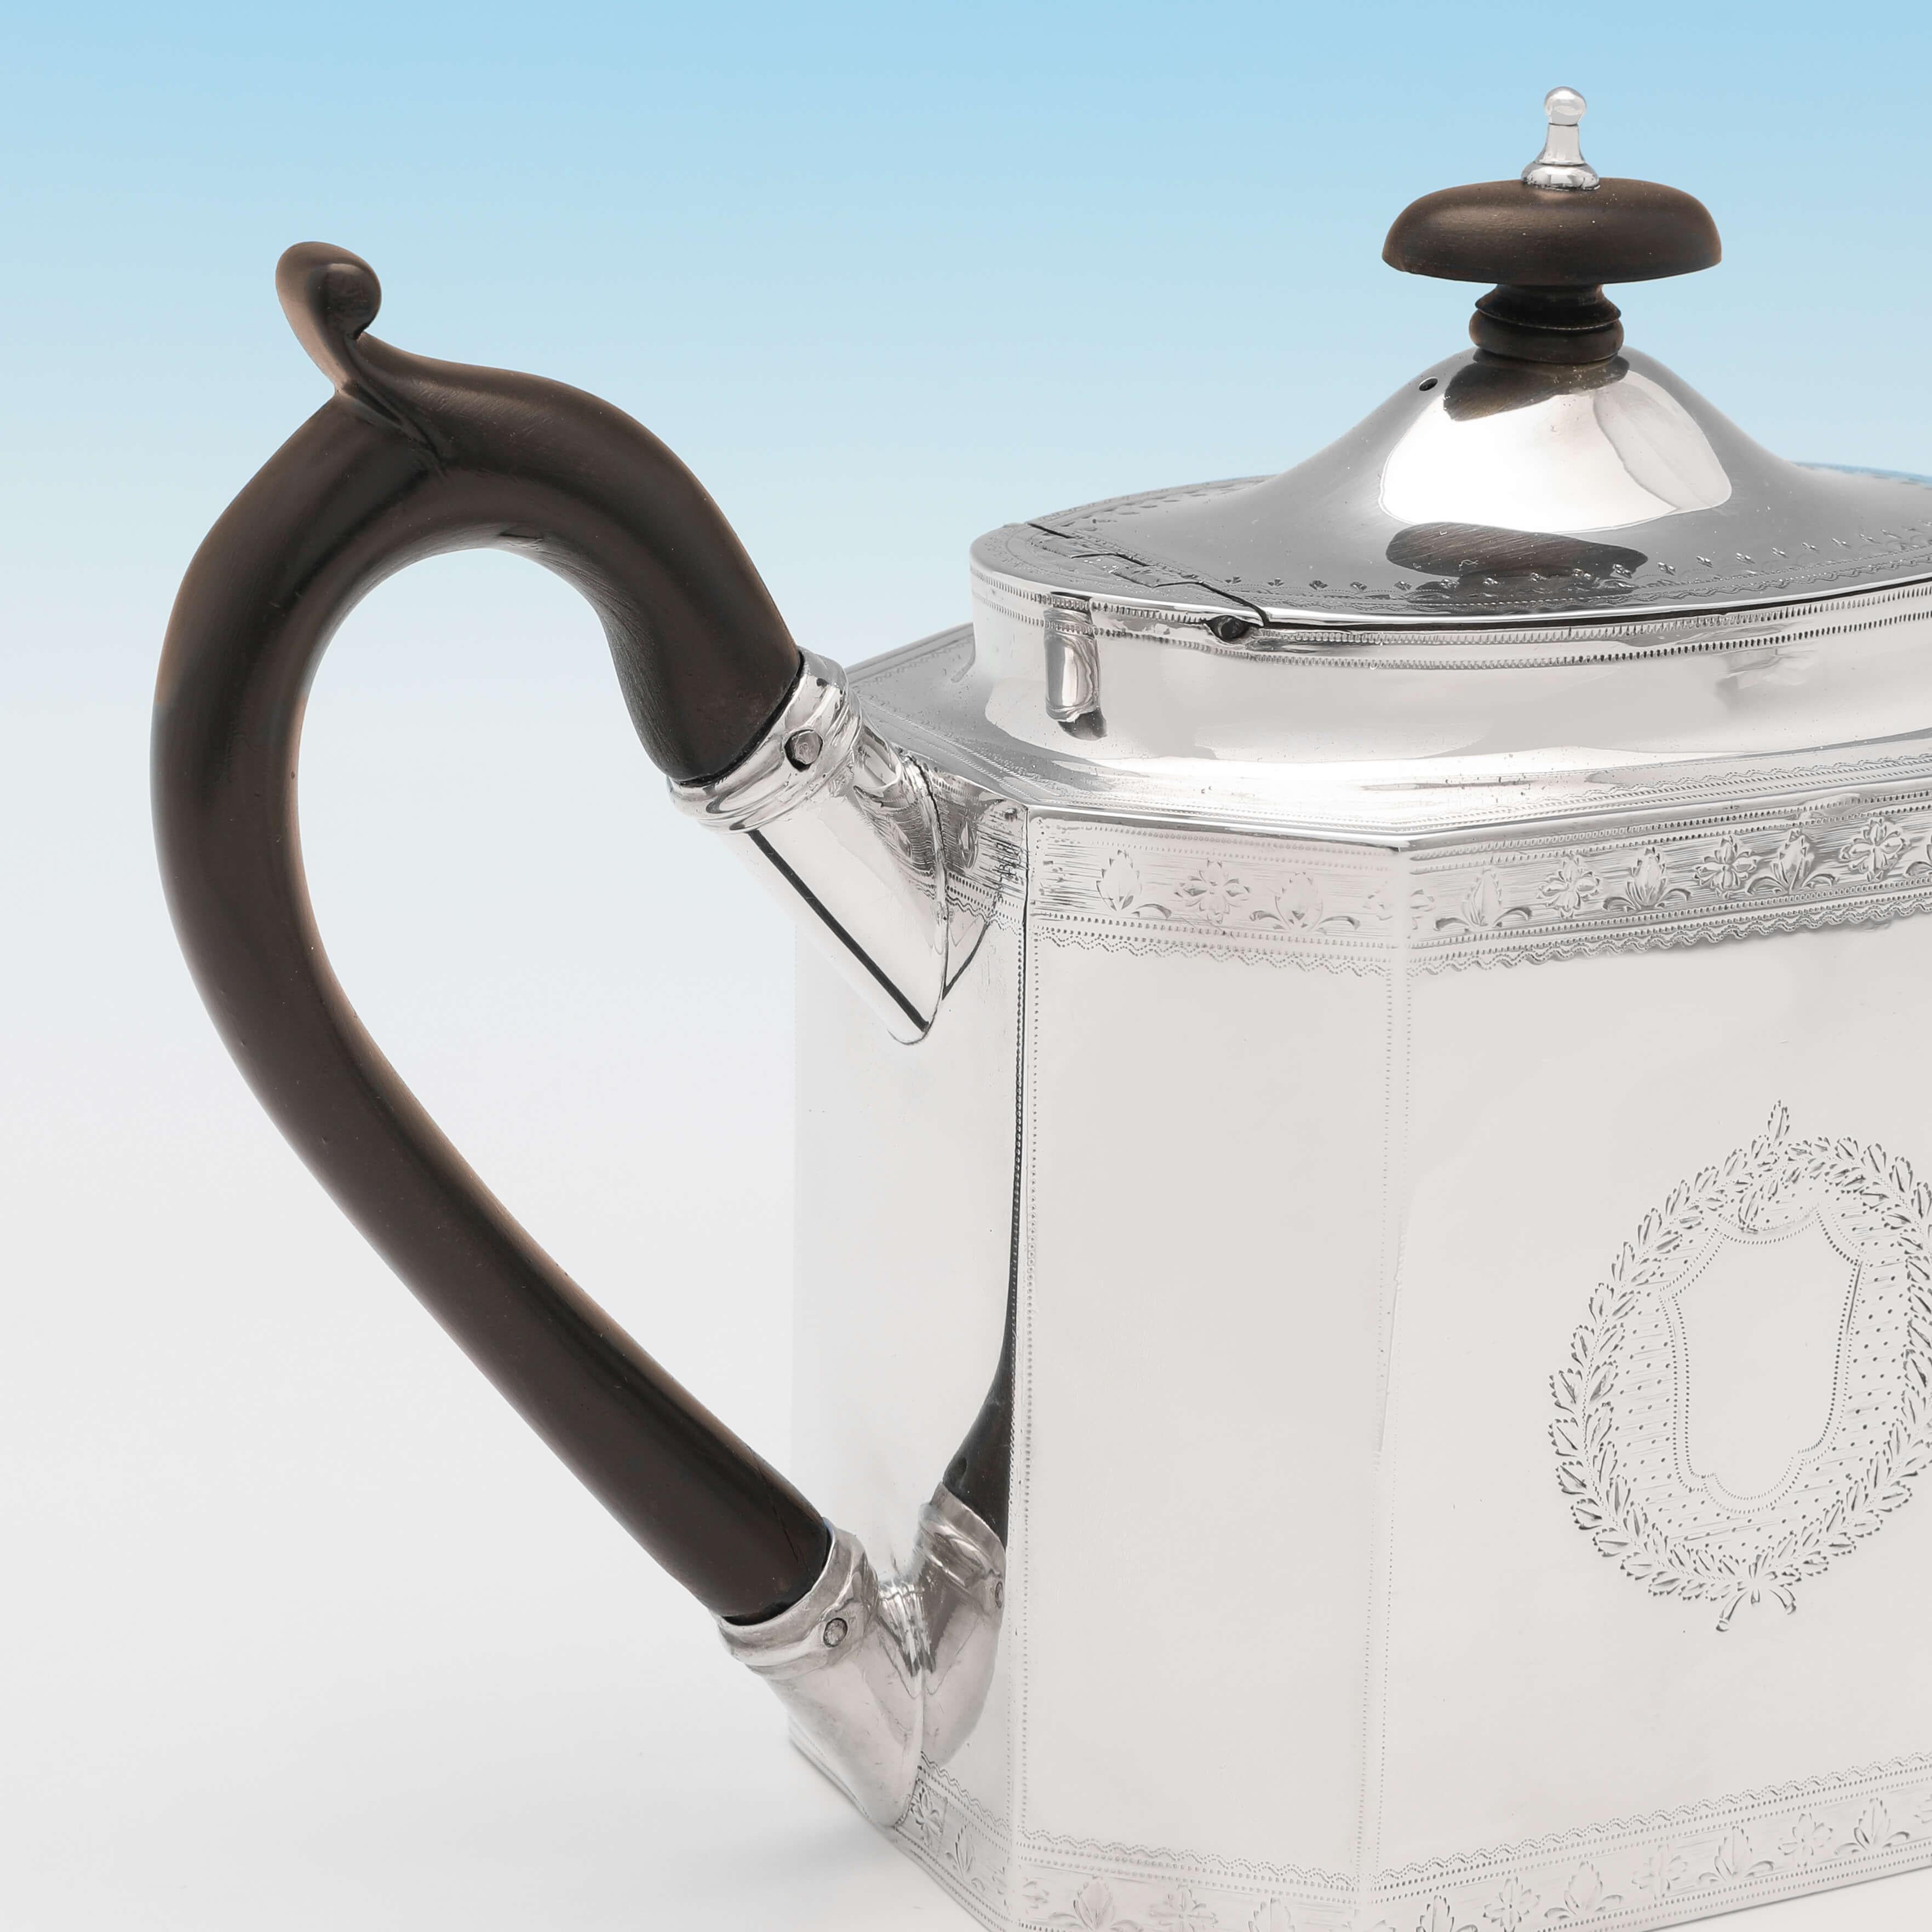 English George III Neoclassical Antique Sterling Silver Teapot & Stand from 1793-1794